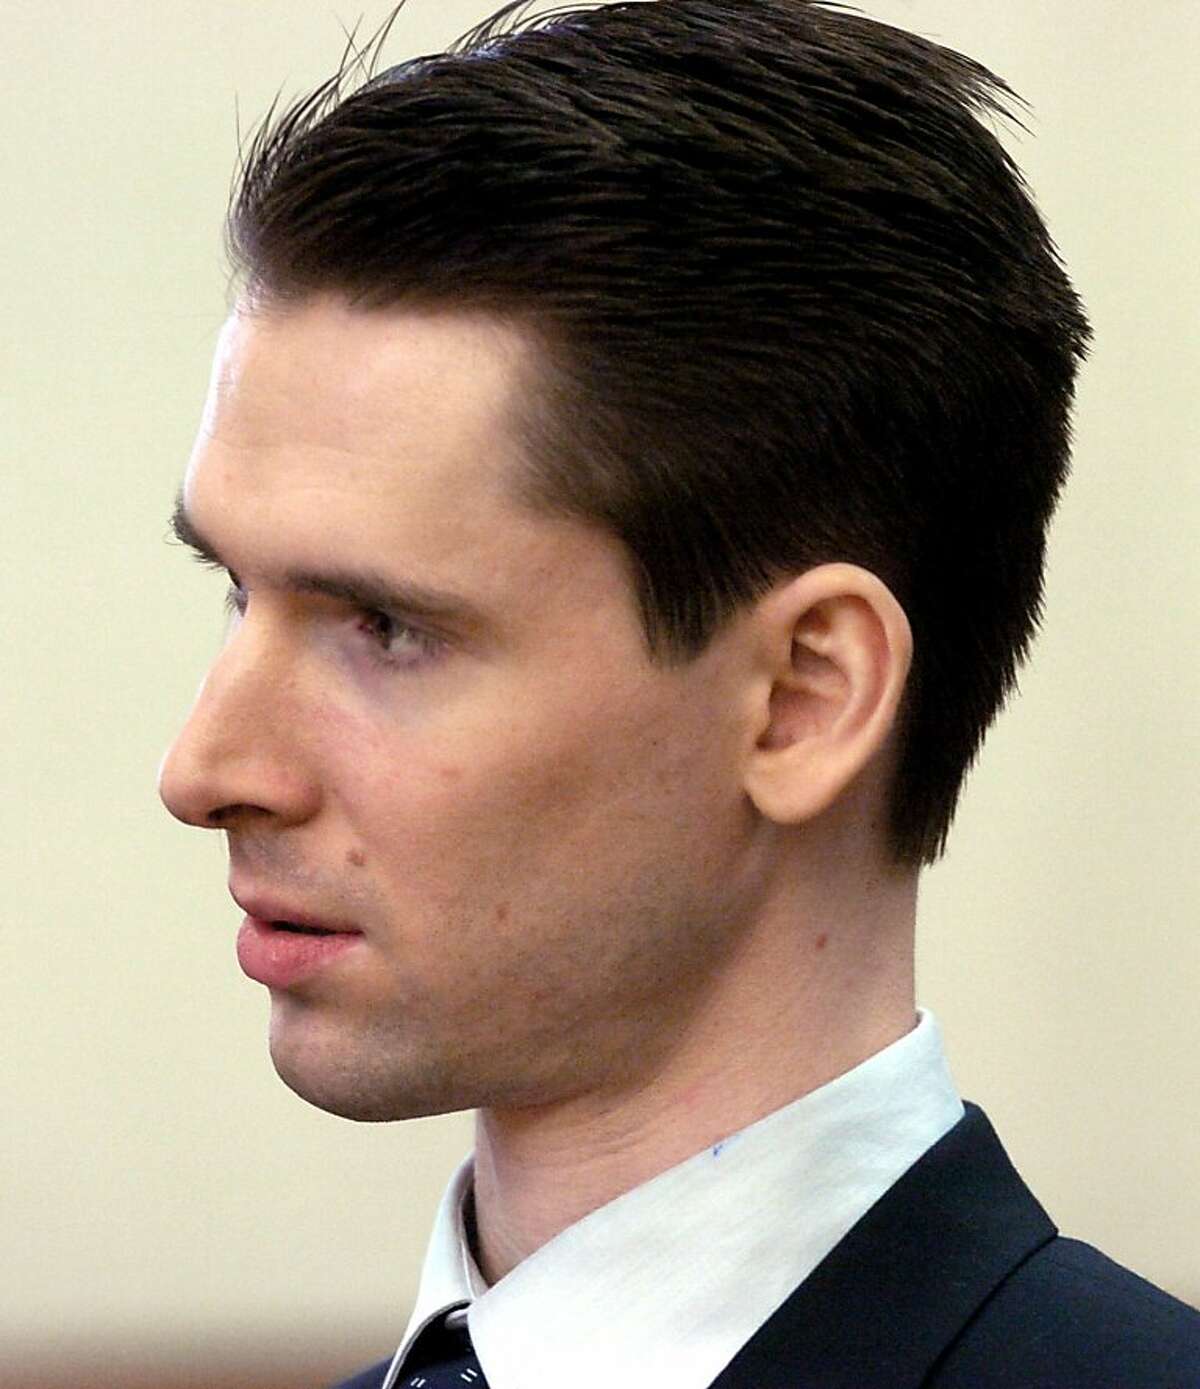 Justin Helzer is shown at the Bray Court Building in Martinez, Calif. on Friday, April 30, 2004, during opening statements in his death penalty murder trial.